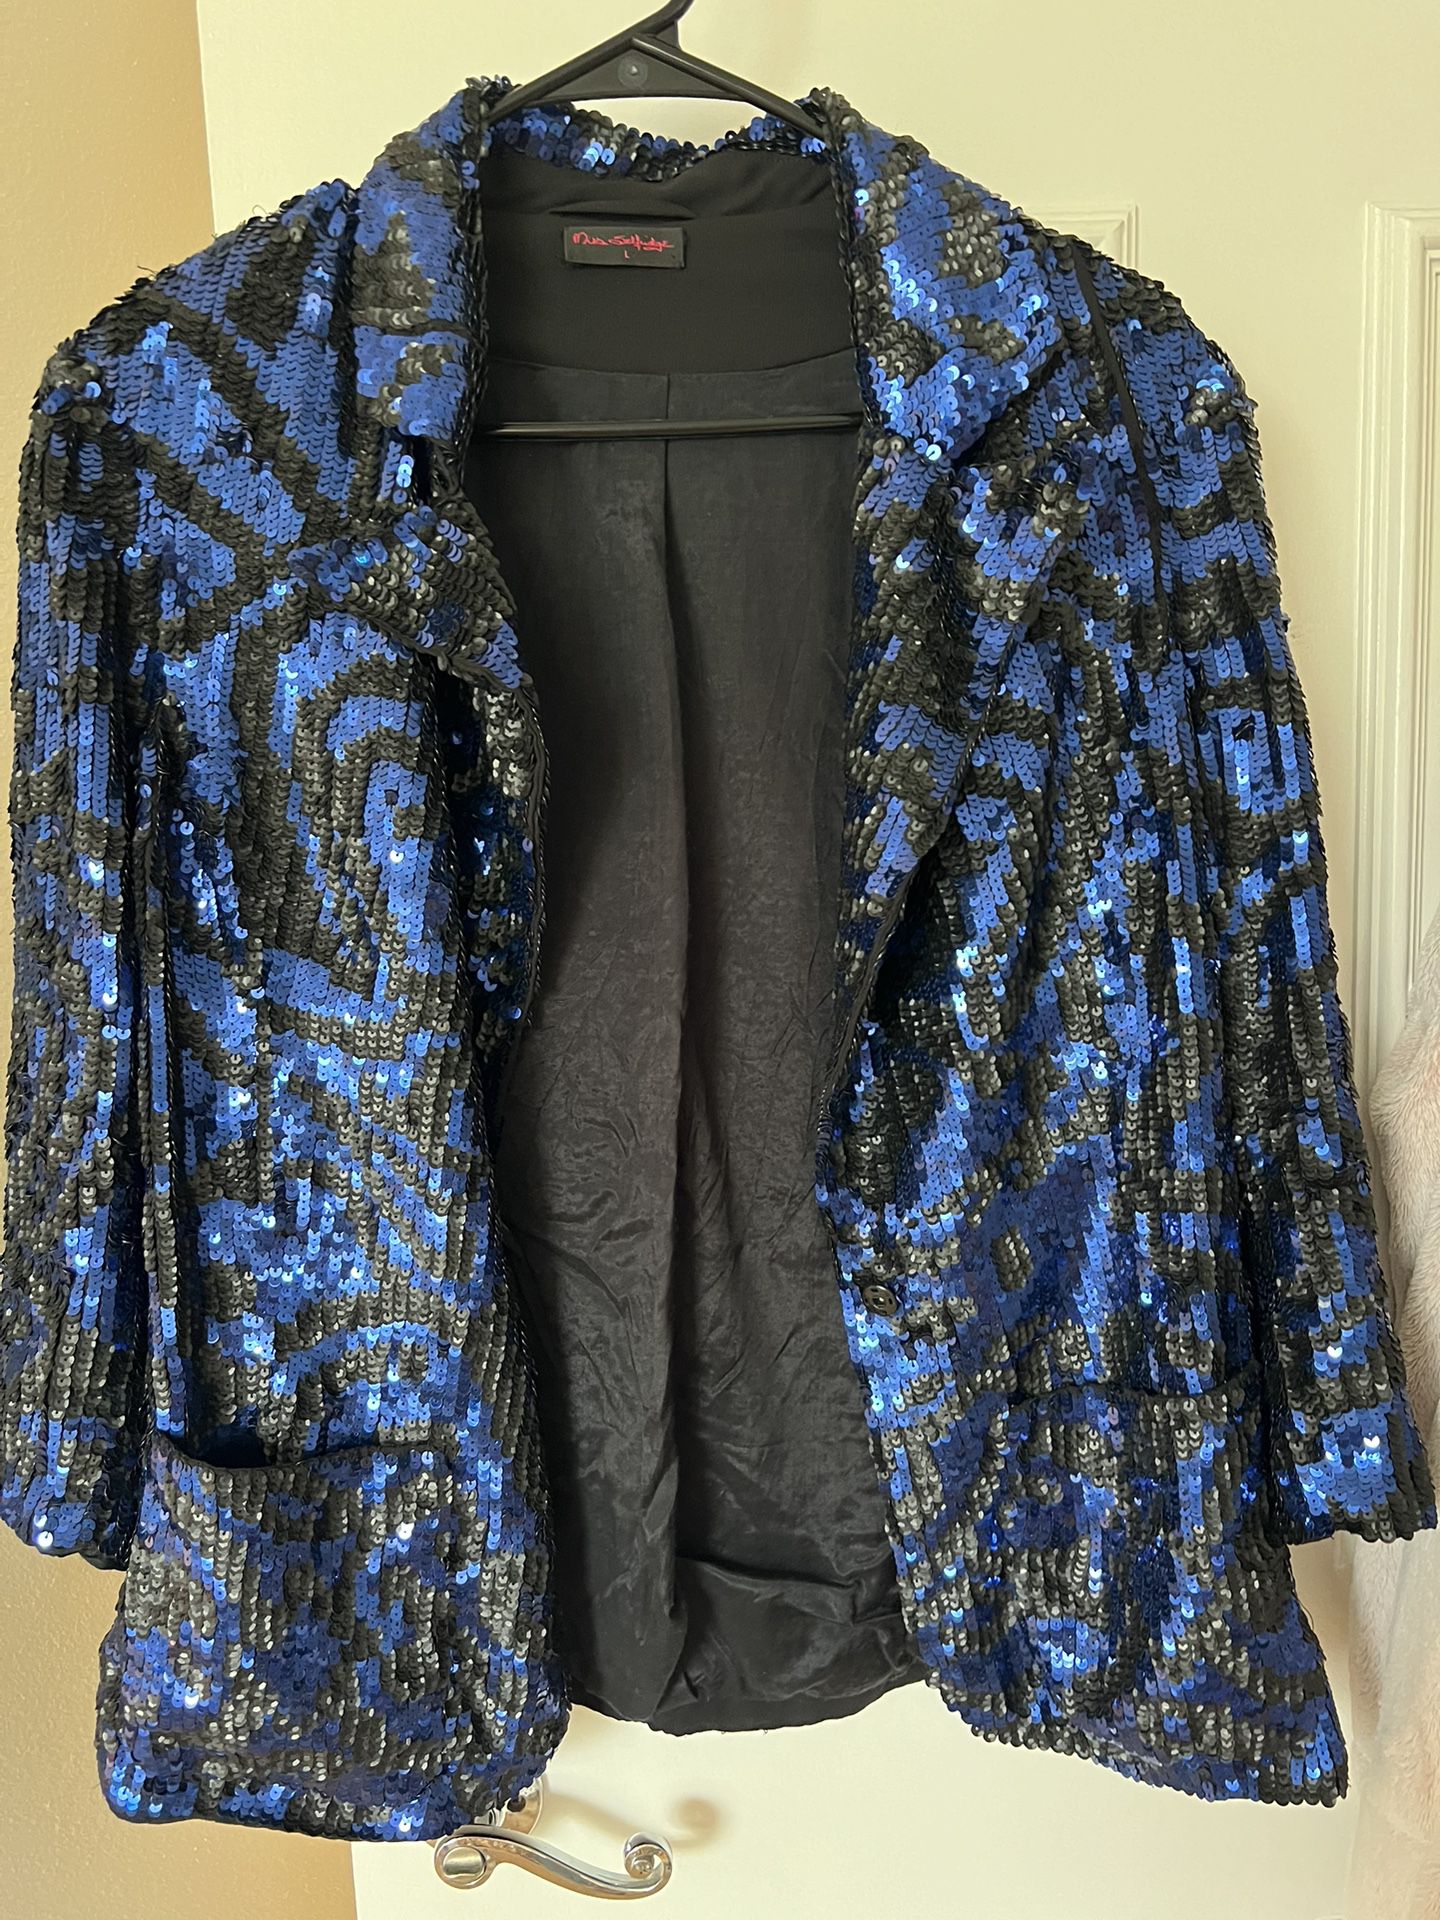 Sequined Jacket Size l 